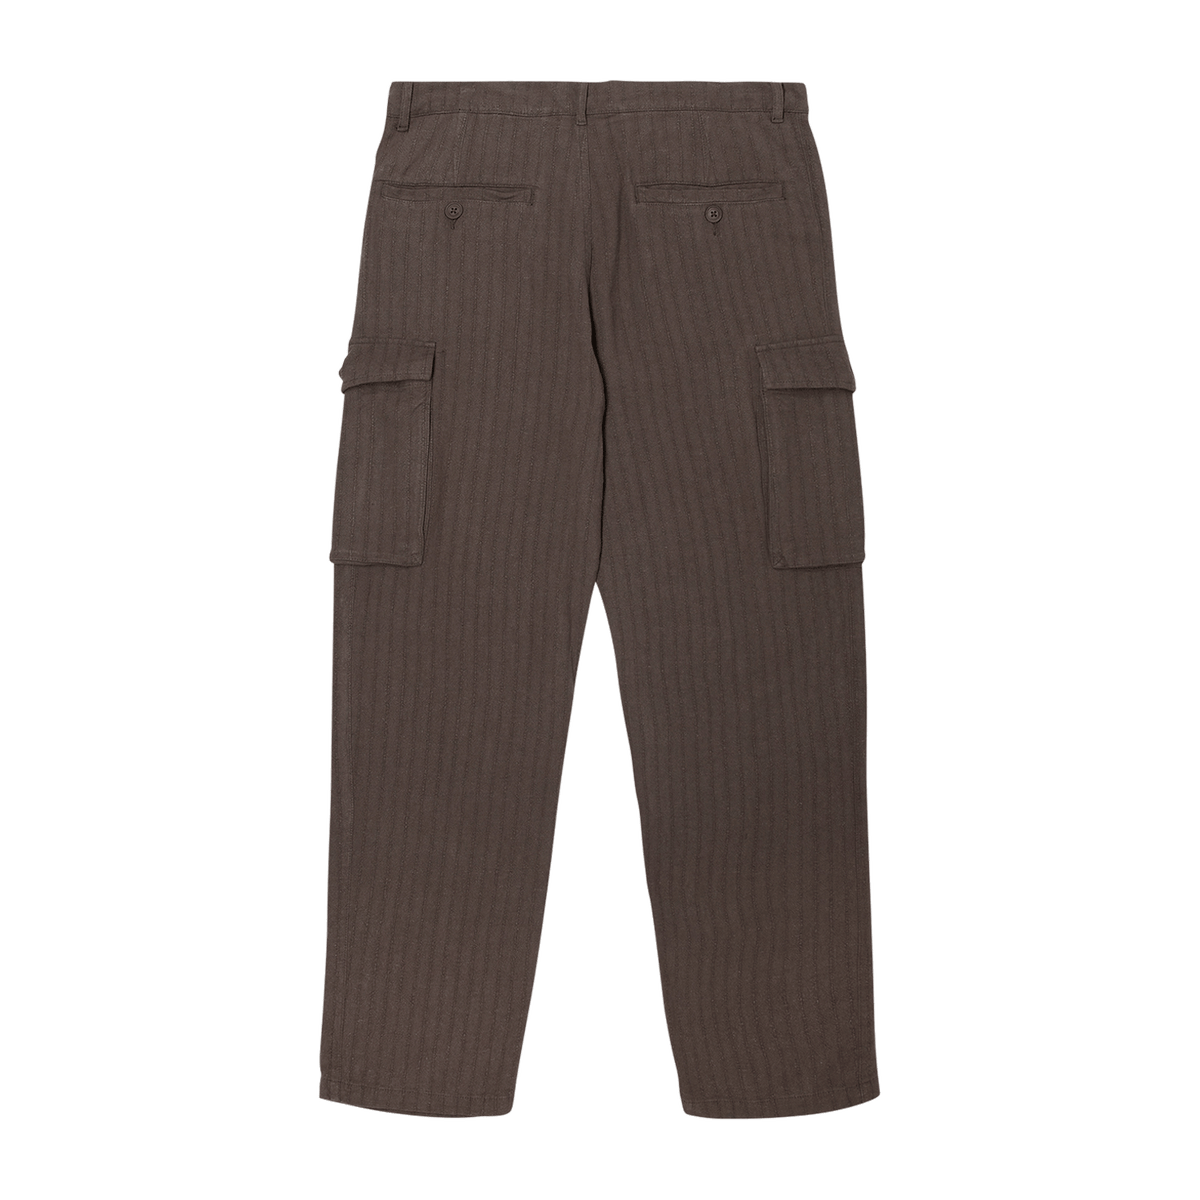 Luther Cargo Pant - Chocolate